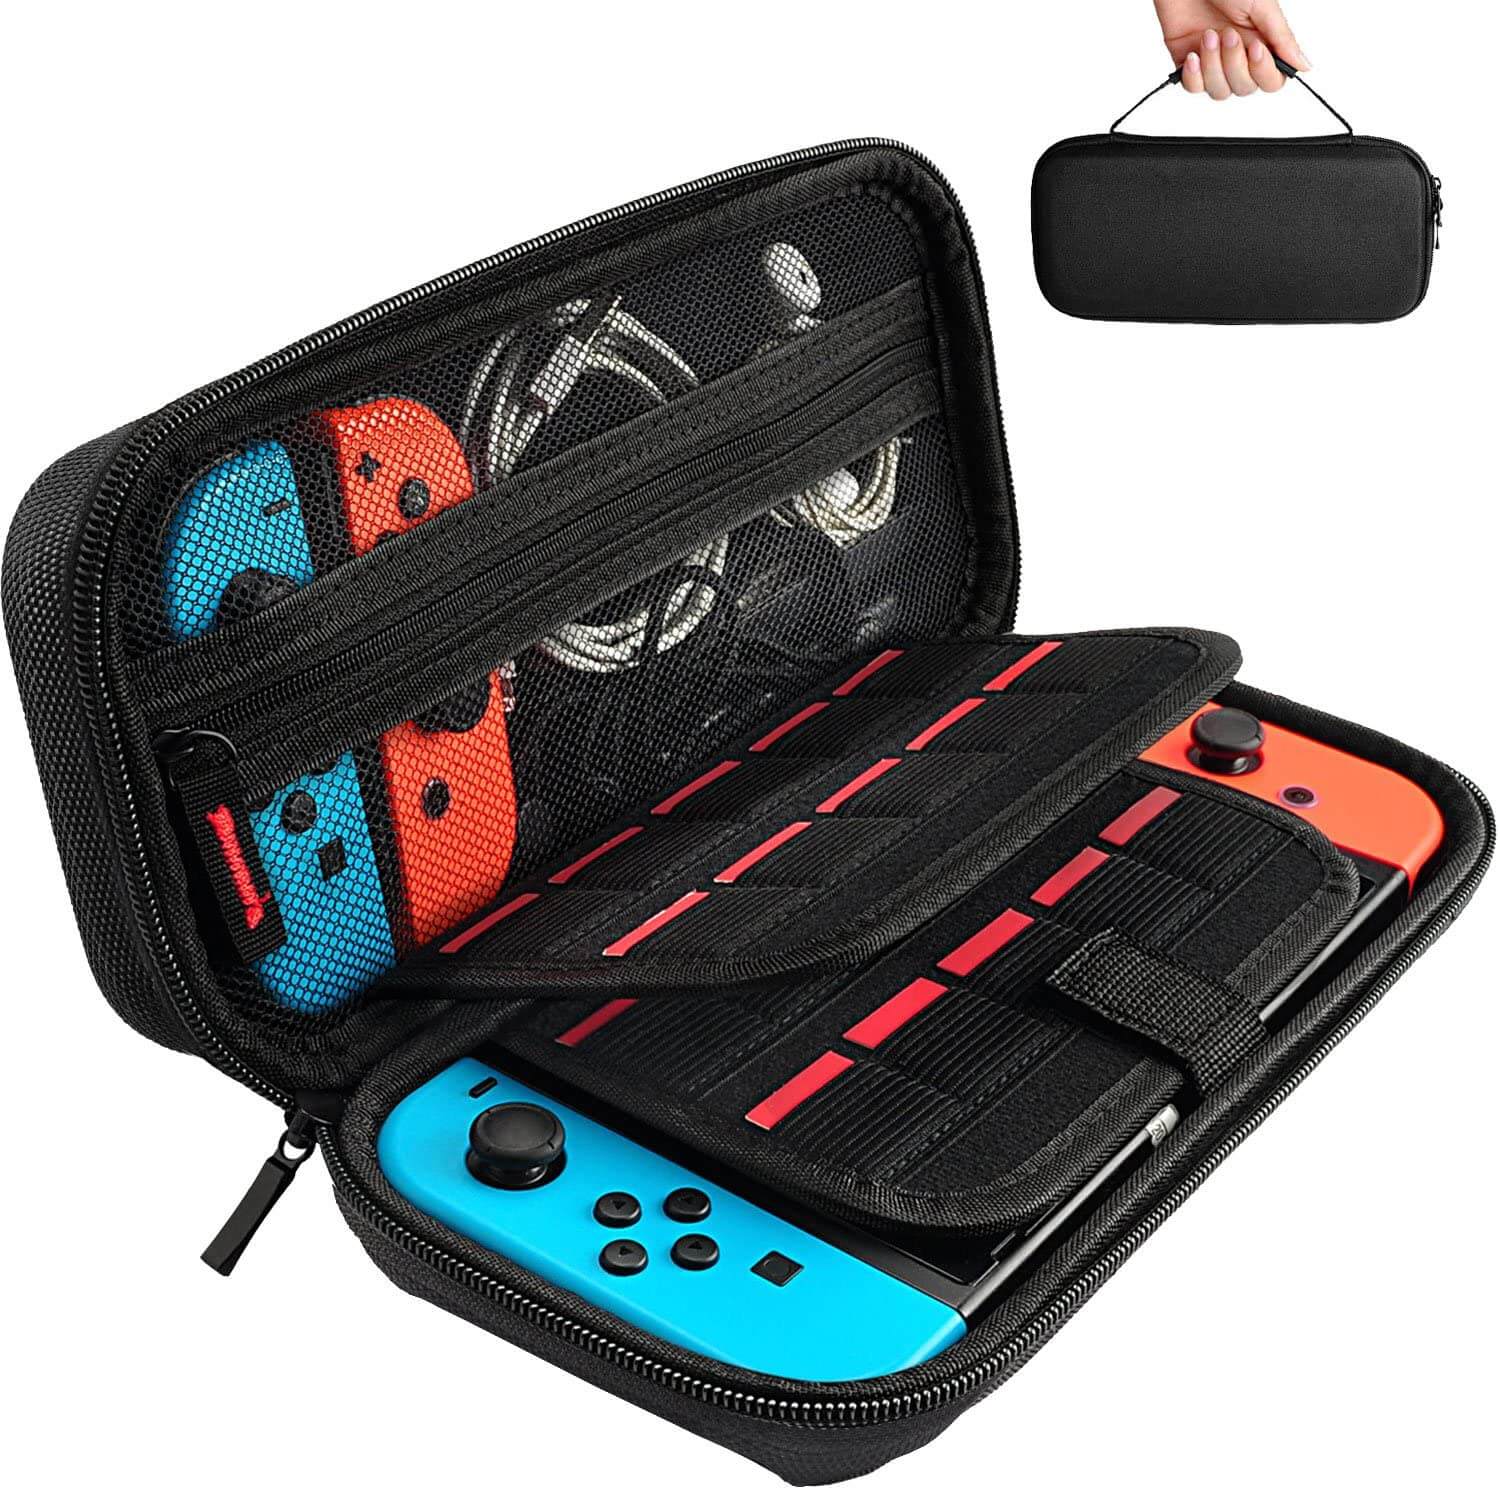 Daydayup Switch Carrying Case compatible with Nintendo Switch/Switch OLED - 20 Game Cartridges Protective Hard Shell Travel Carrying Case Pouch for Console & Accessories